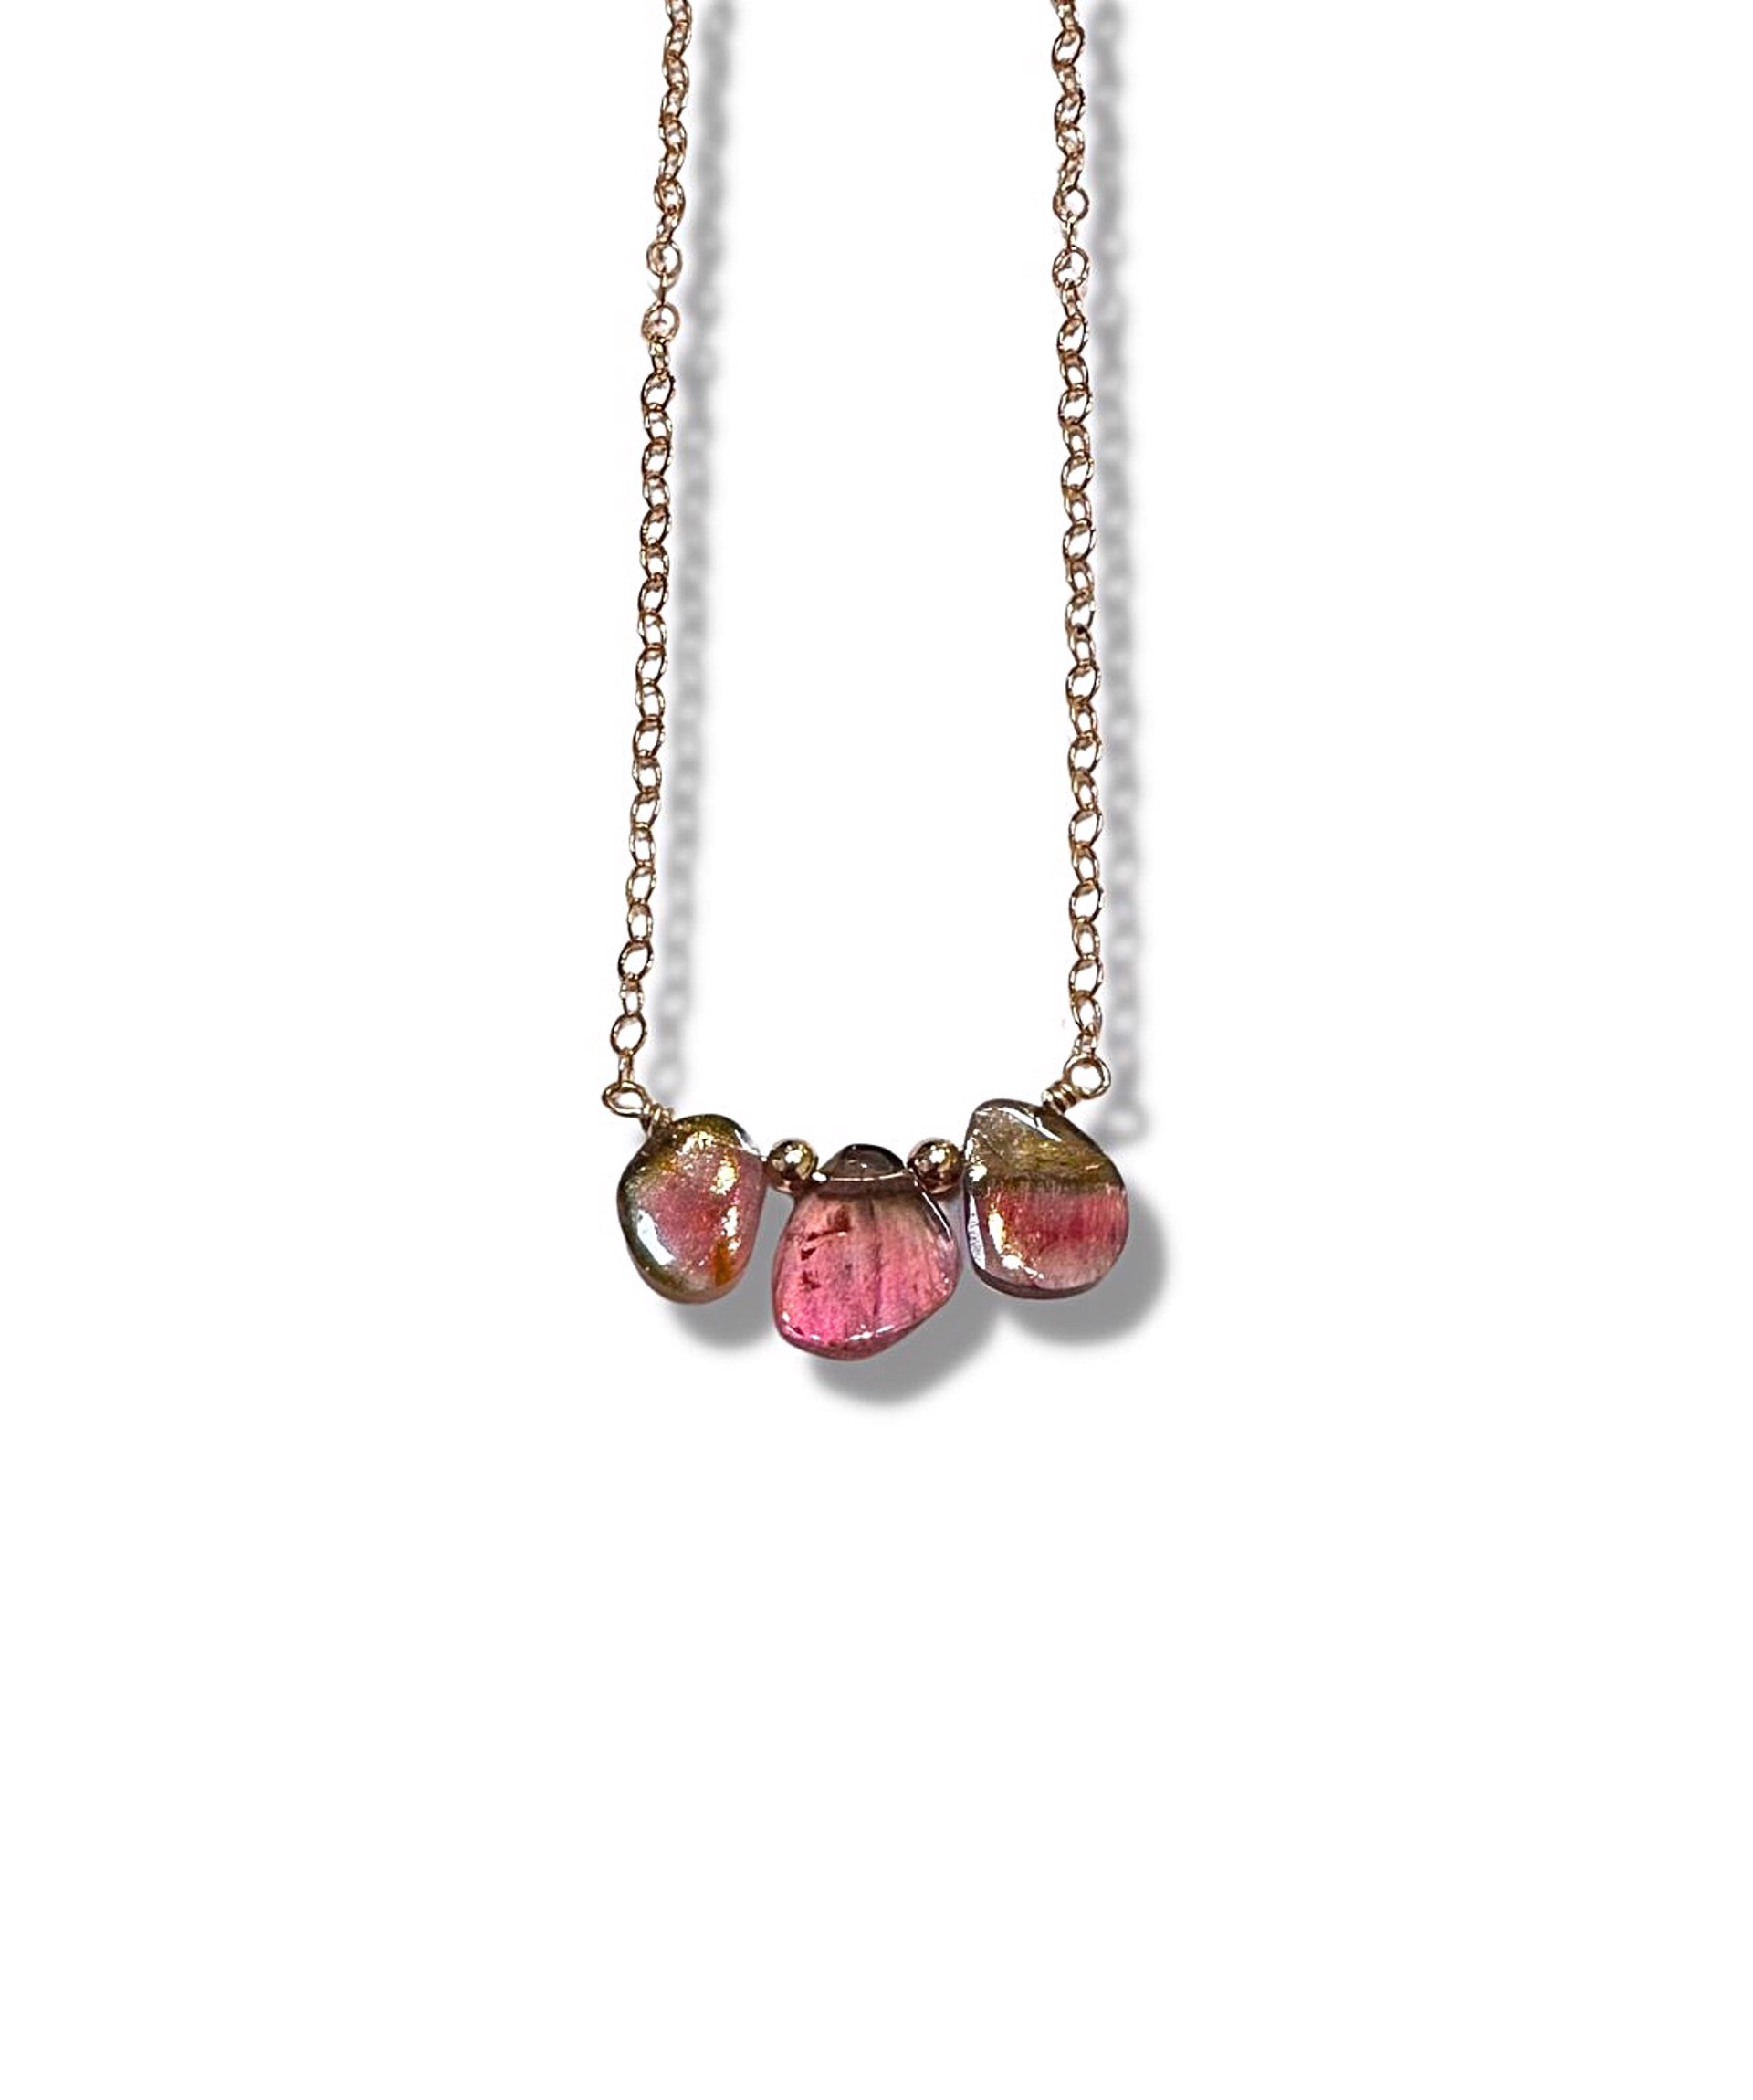 Necklace - Watermelon Tourmaline Necklace with 14K Gold Filling by Julia Balestracci